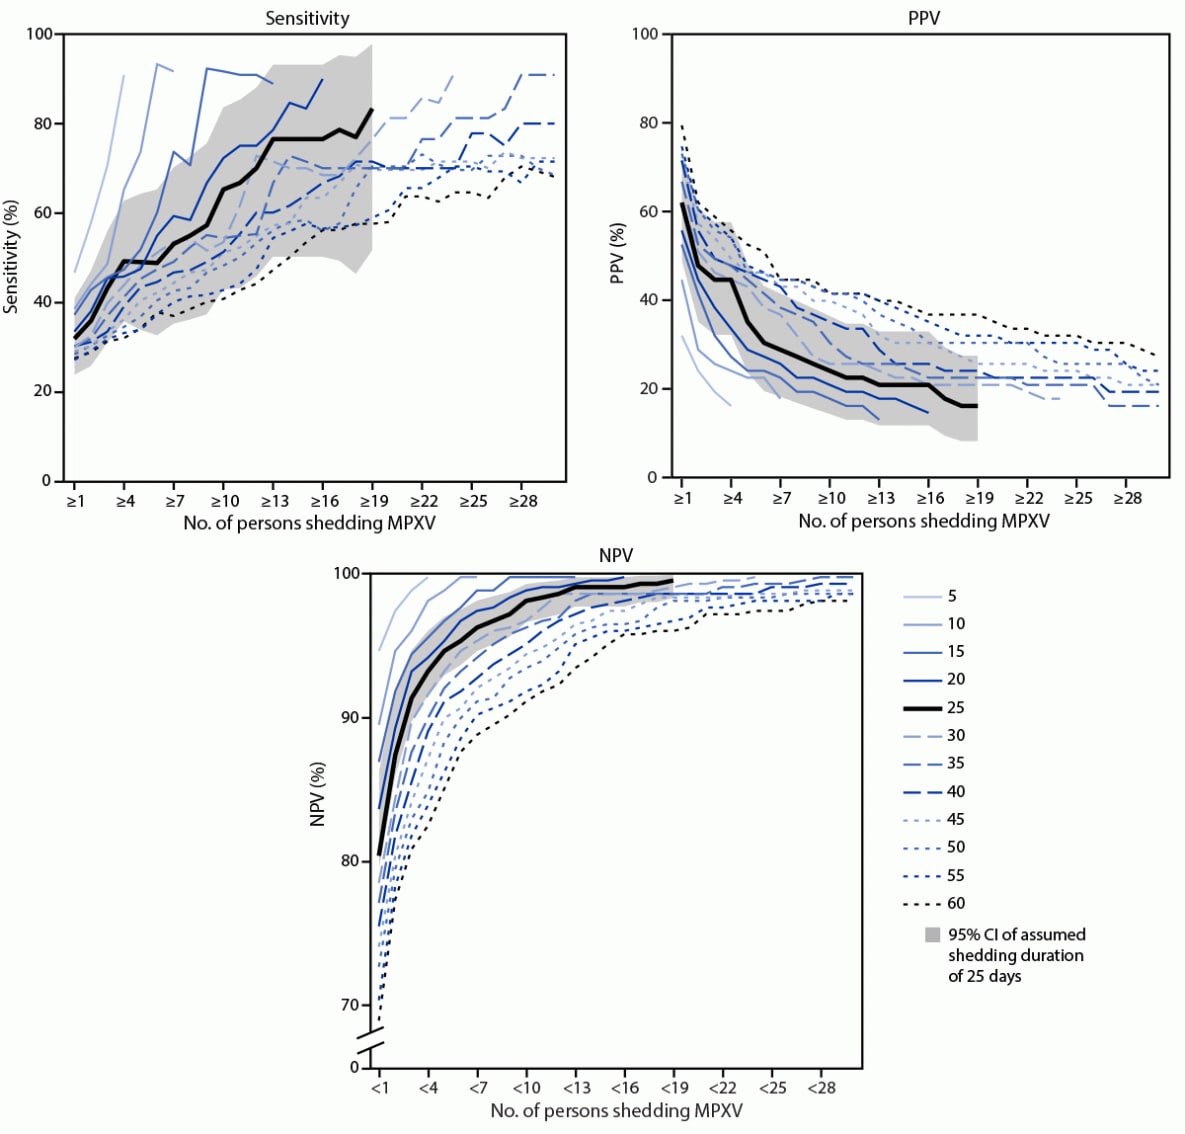 The figure has three panels depicting the sensitivity, positive predictive value, and negative predictive value of wastewater surveillance for detecting persons shedding Monkeypox virus in a county in a week for different assumed shedding durations in the United States during August 2022–May 2023.